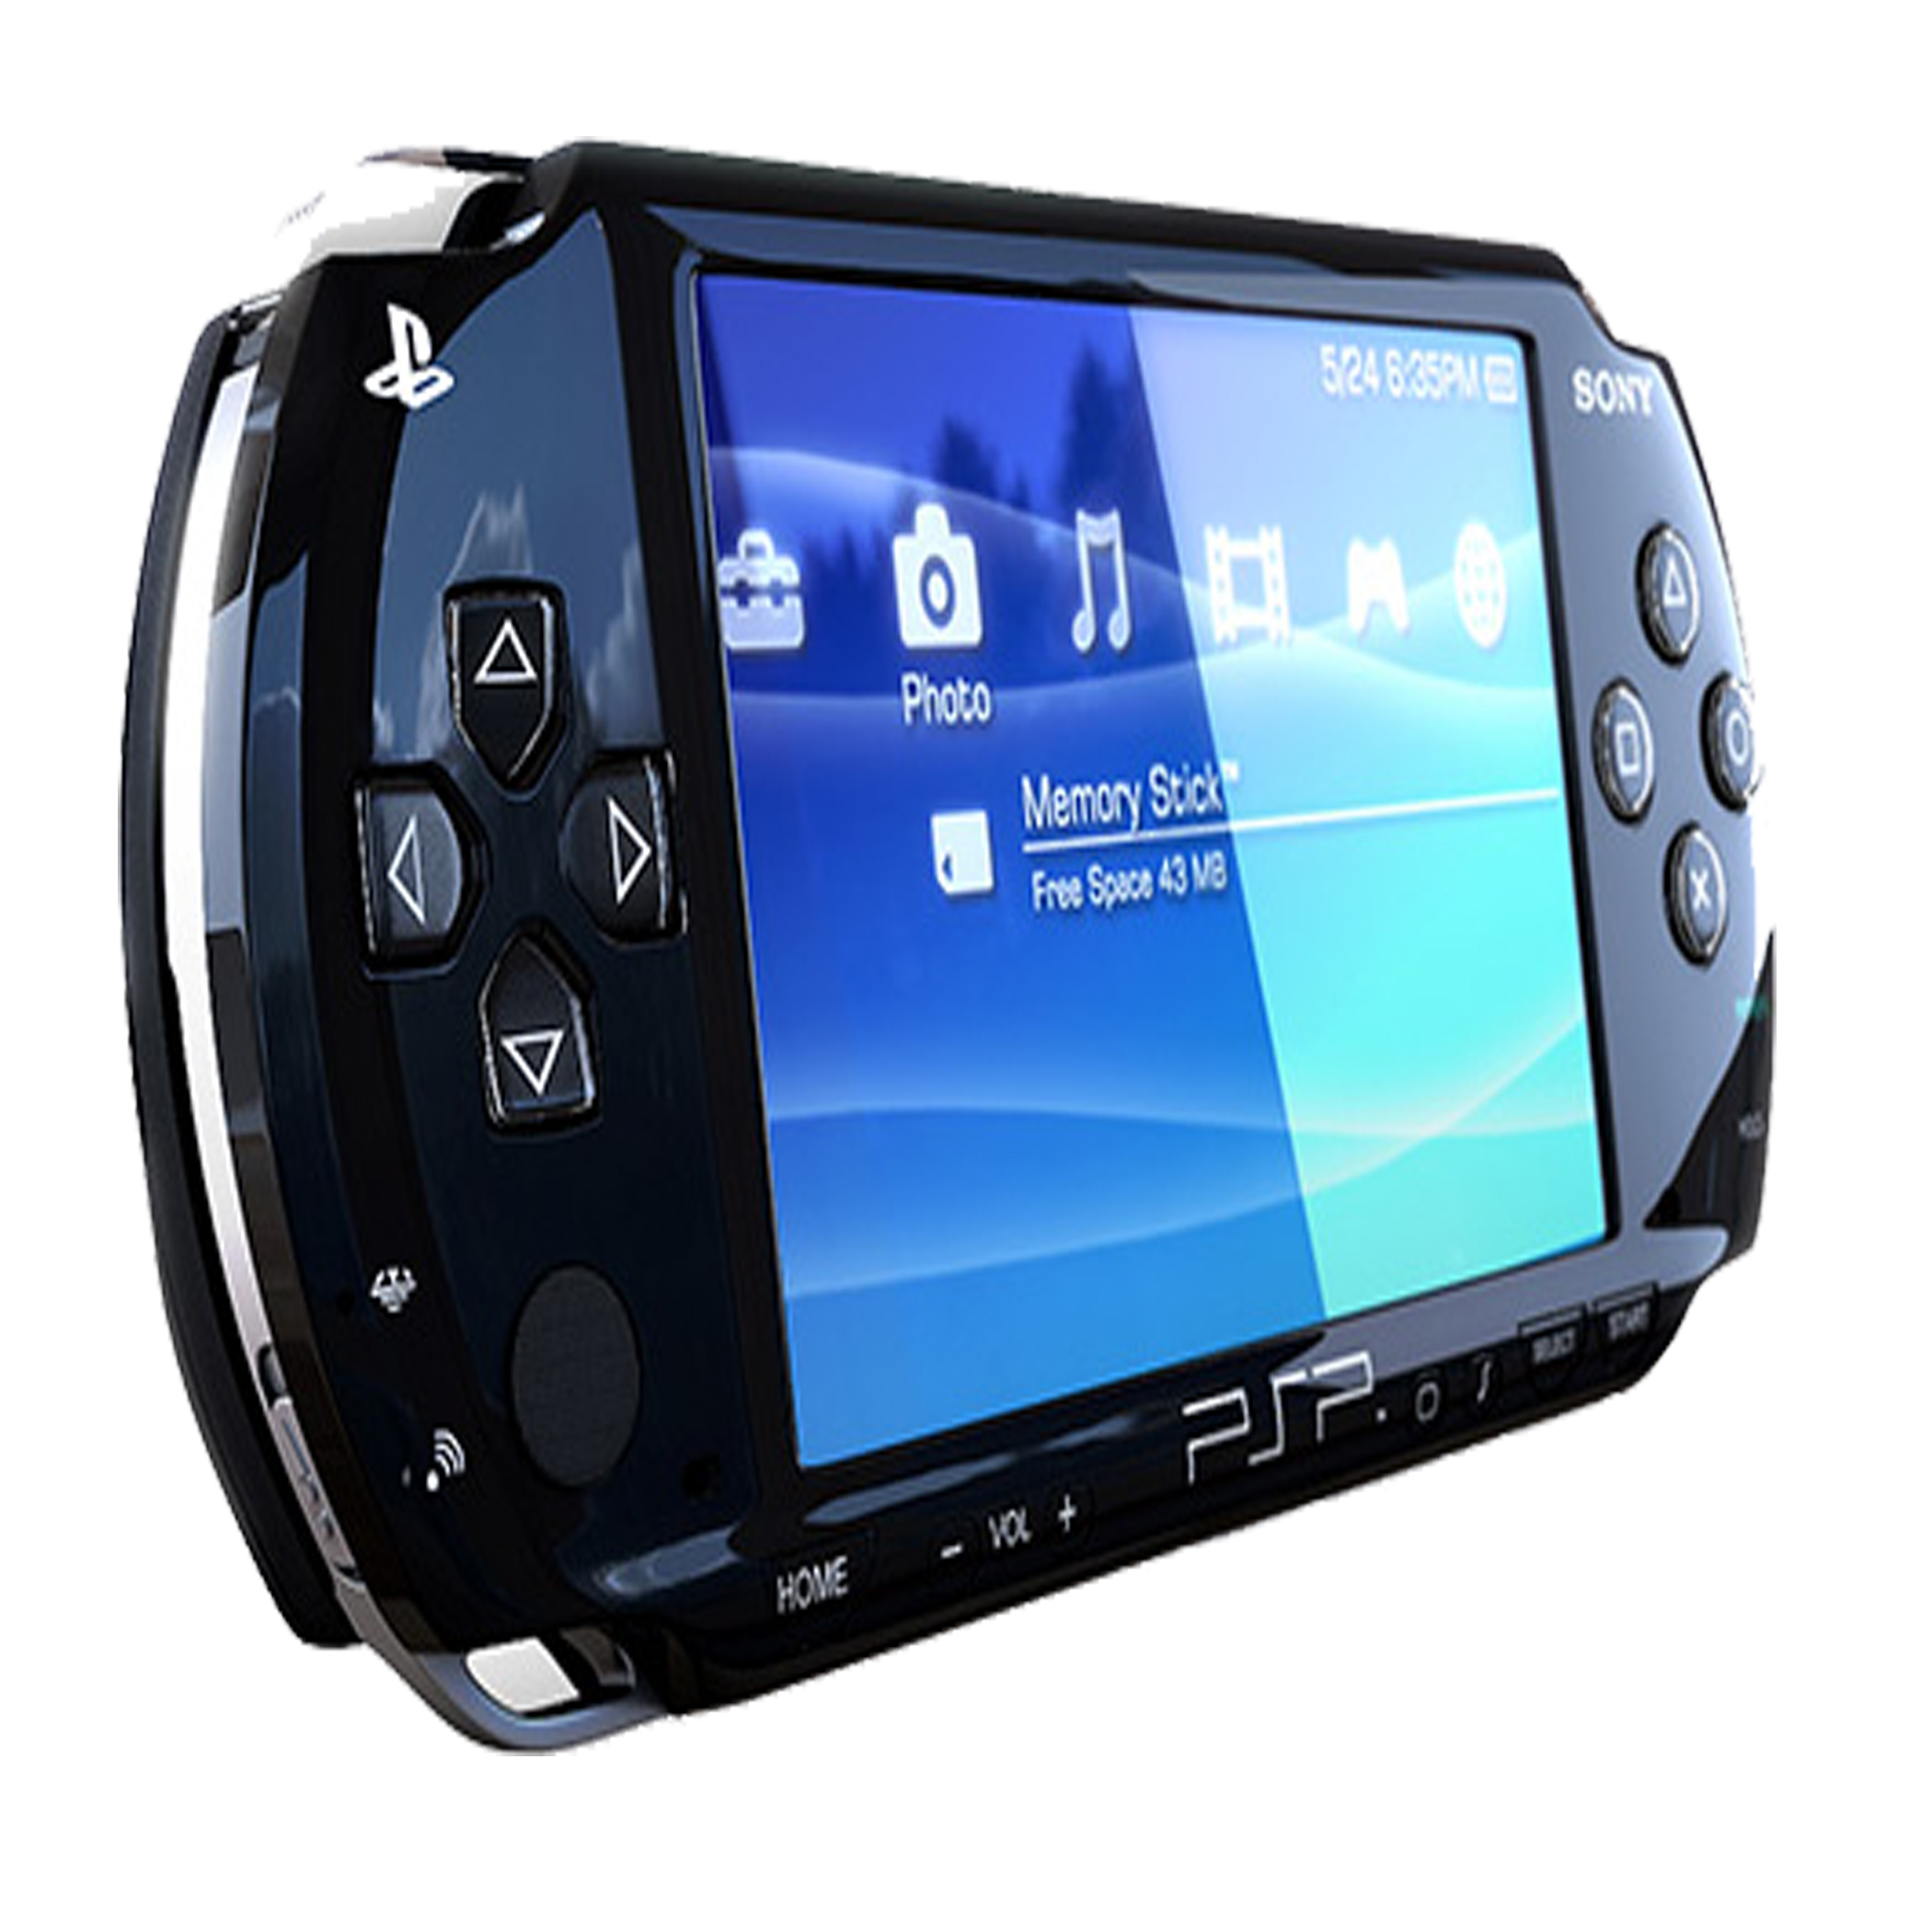 psp firmware 6.60 download